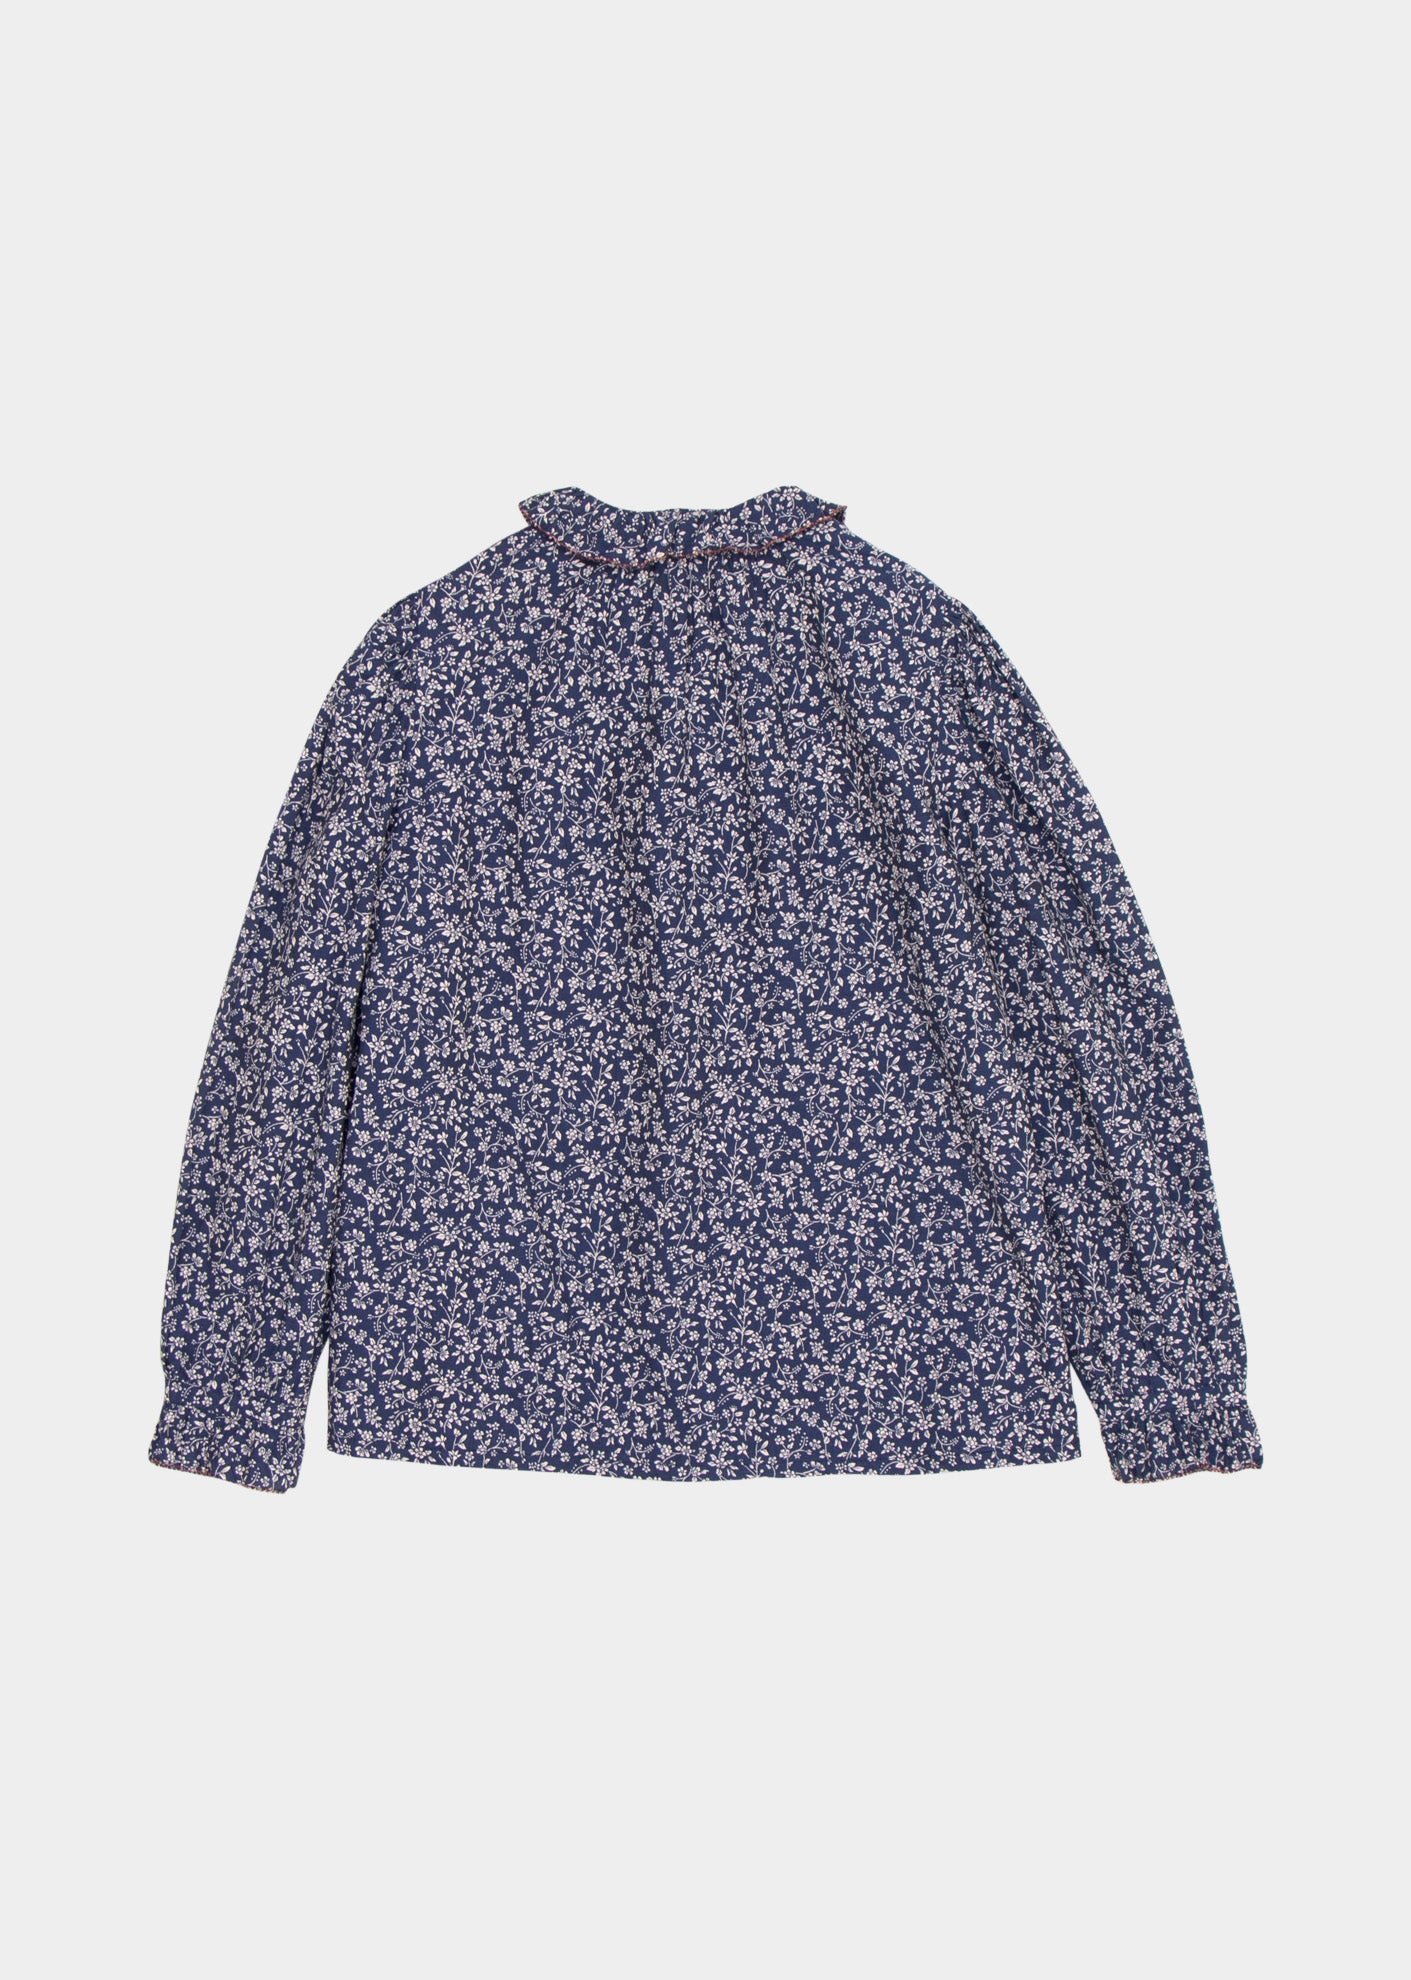 MADISON GIRL BLOUSE - NAVY FLORAL